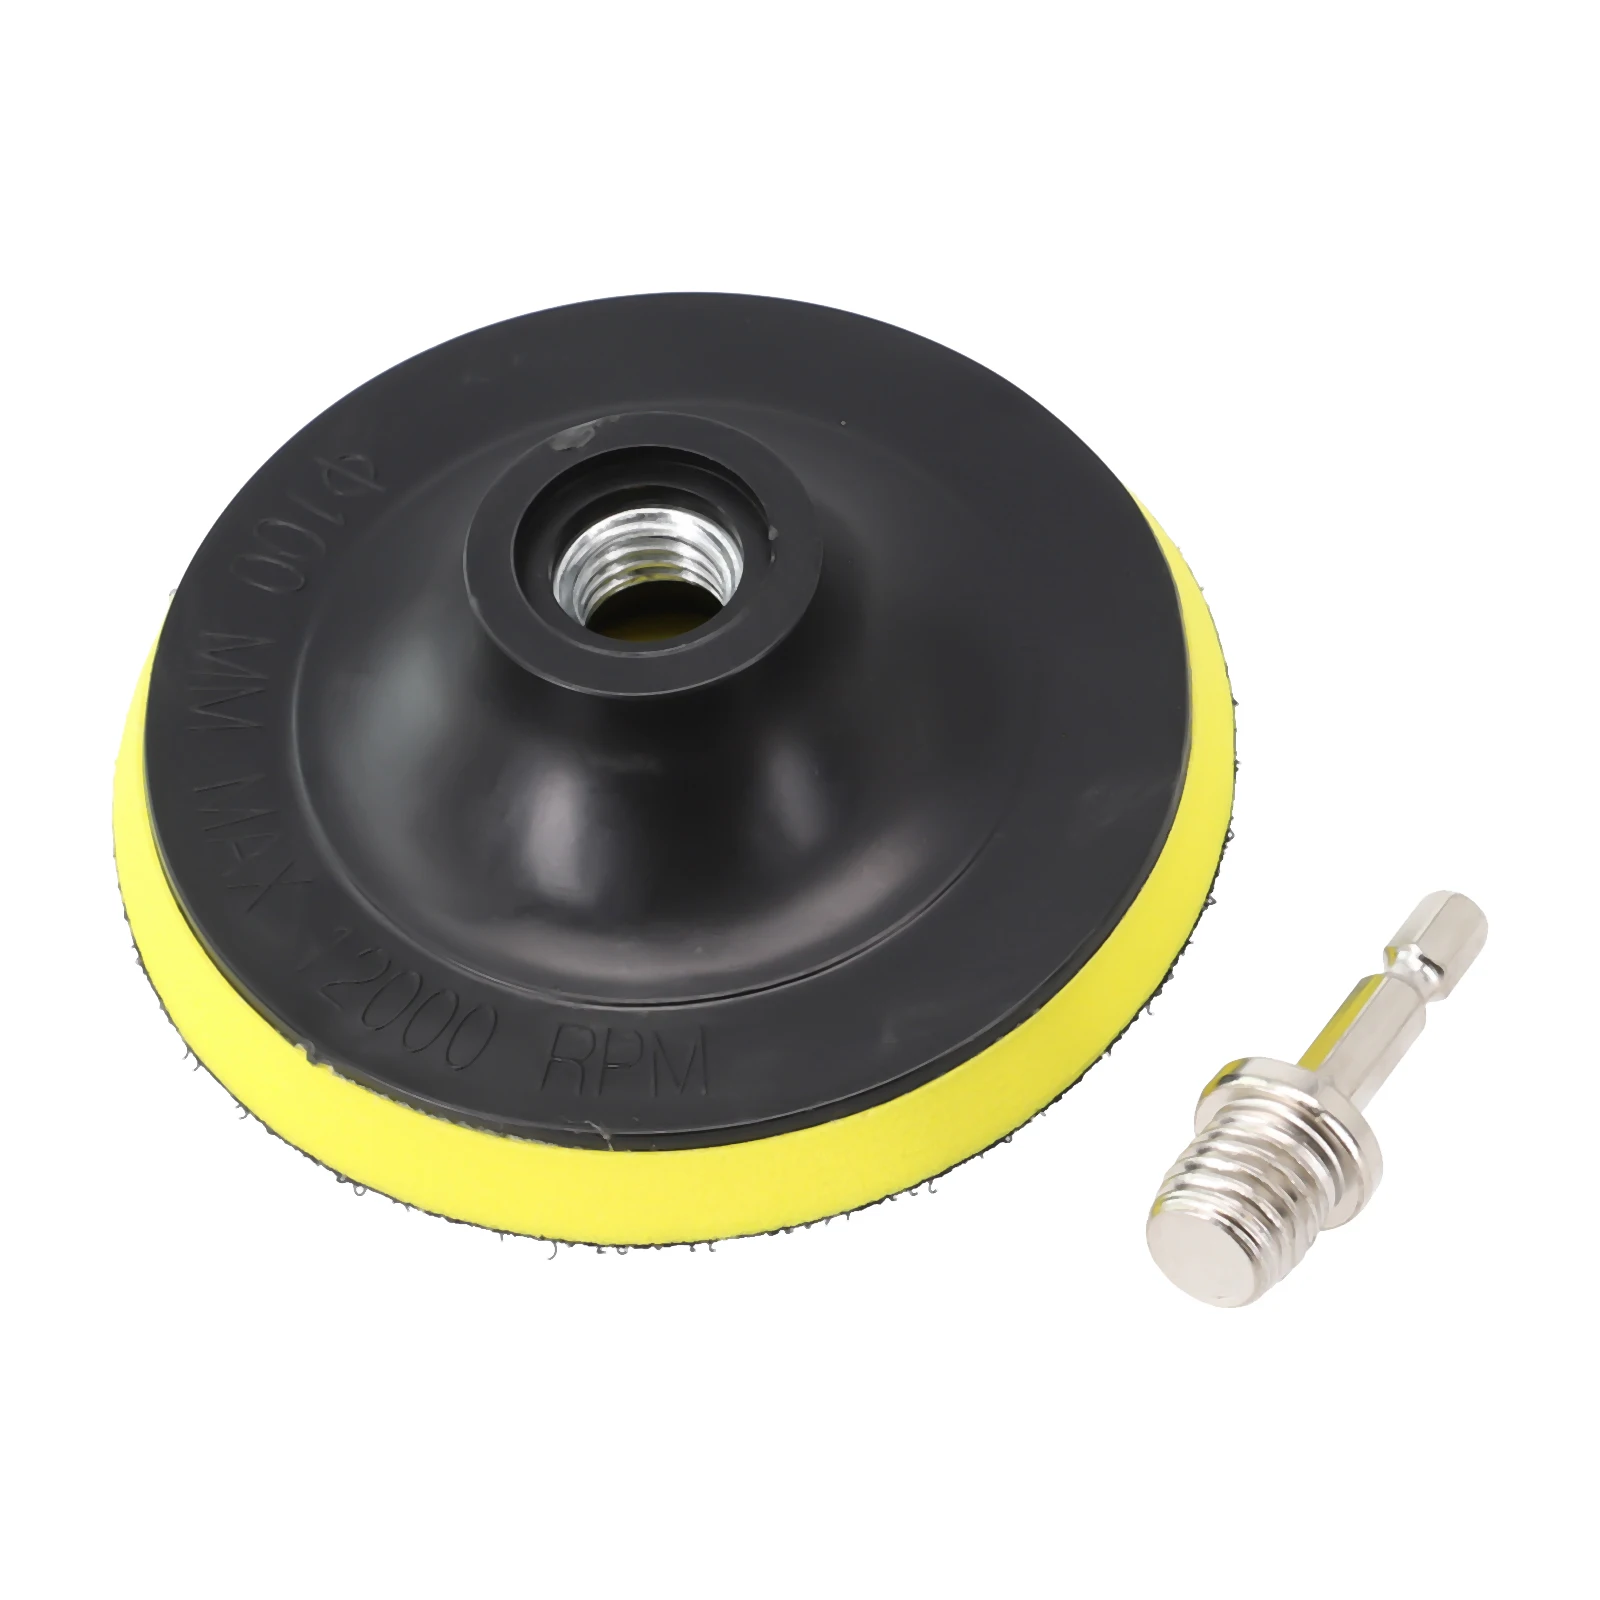 

1set Backing Pad With Drill Adapter 10/14mm Thread Adapter 3-7 Inch Self-adhesive Type Grinder Backing Pad Polishing Plate Disc